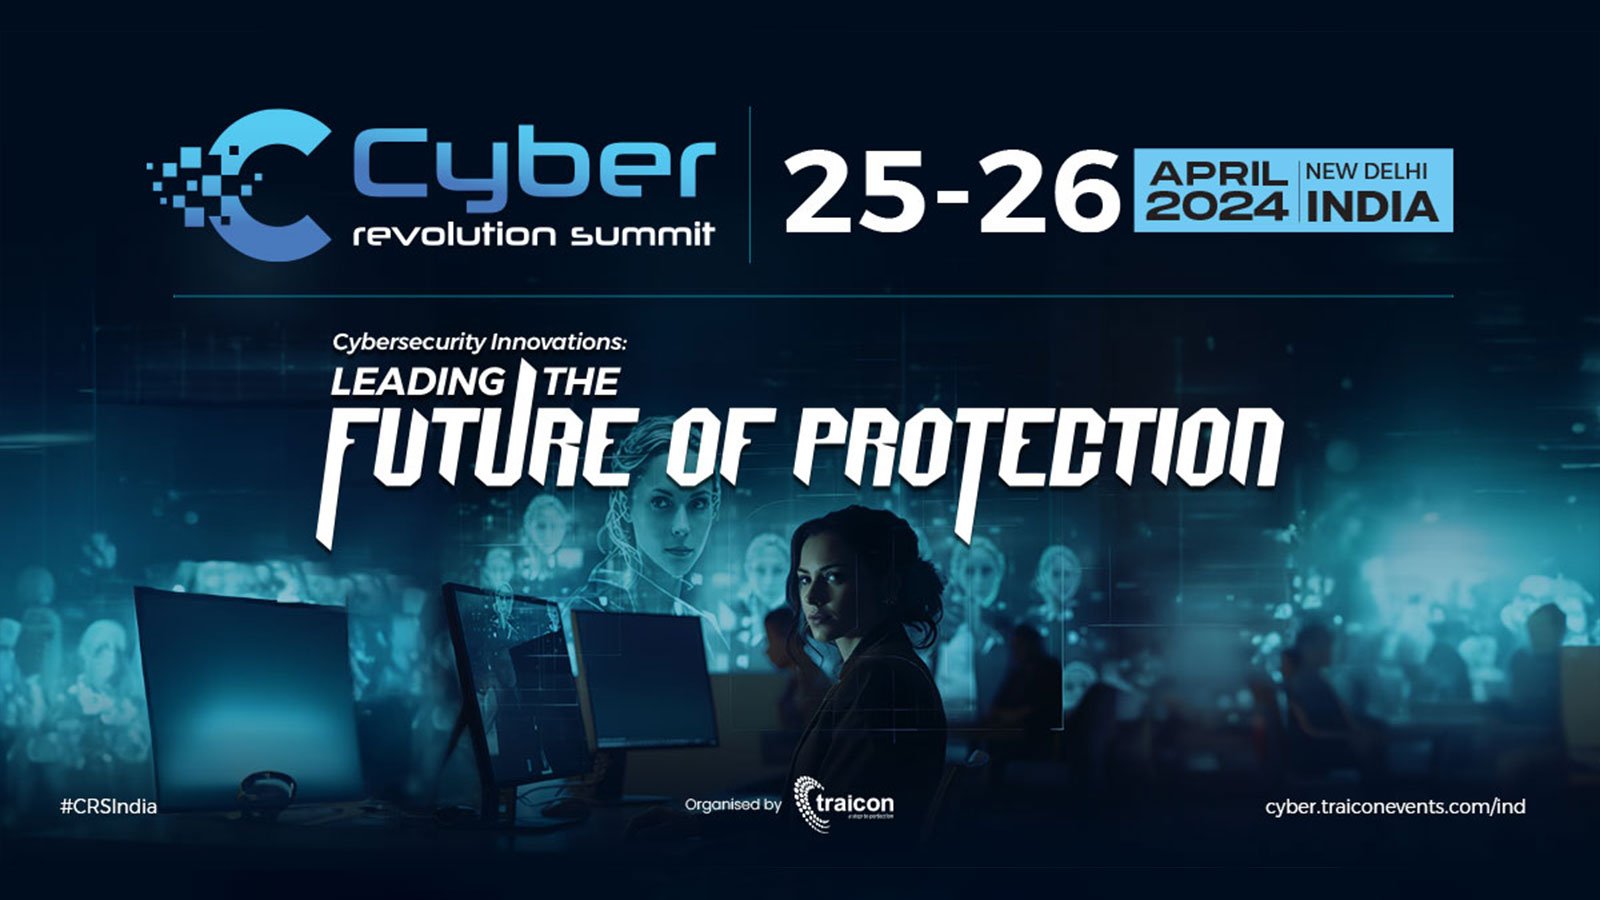 India Cyber Revolution Summit 2024 – Cybersecurity Innovations: Leading the Future of Protection